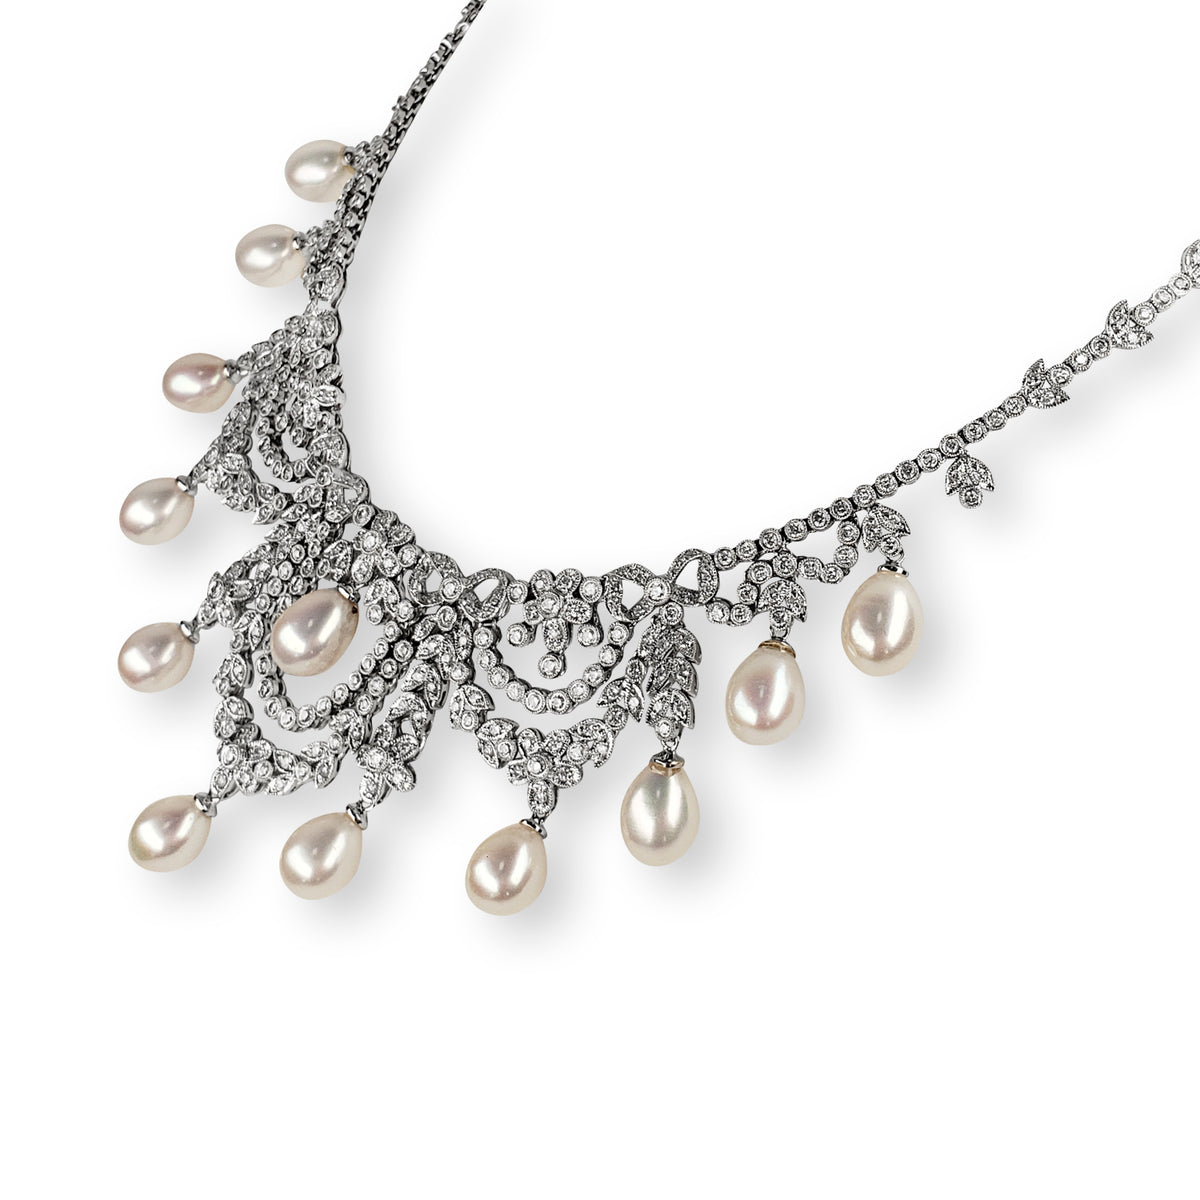 Diamond and Pearl Statement Necklace